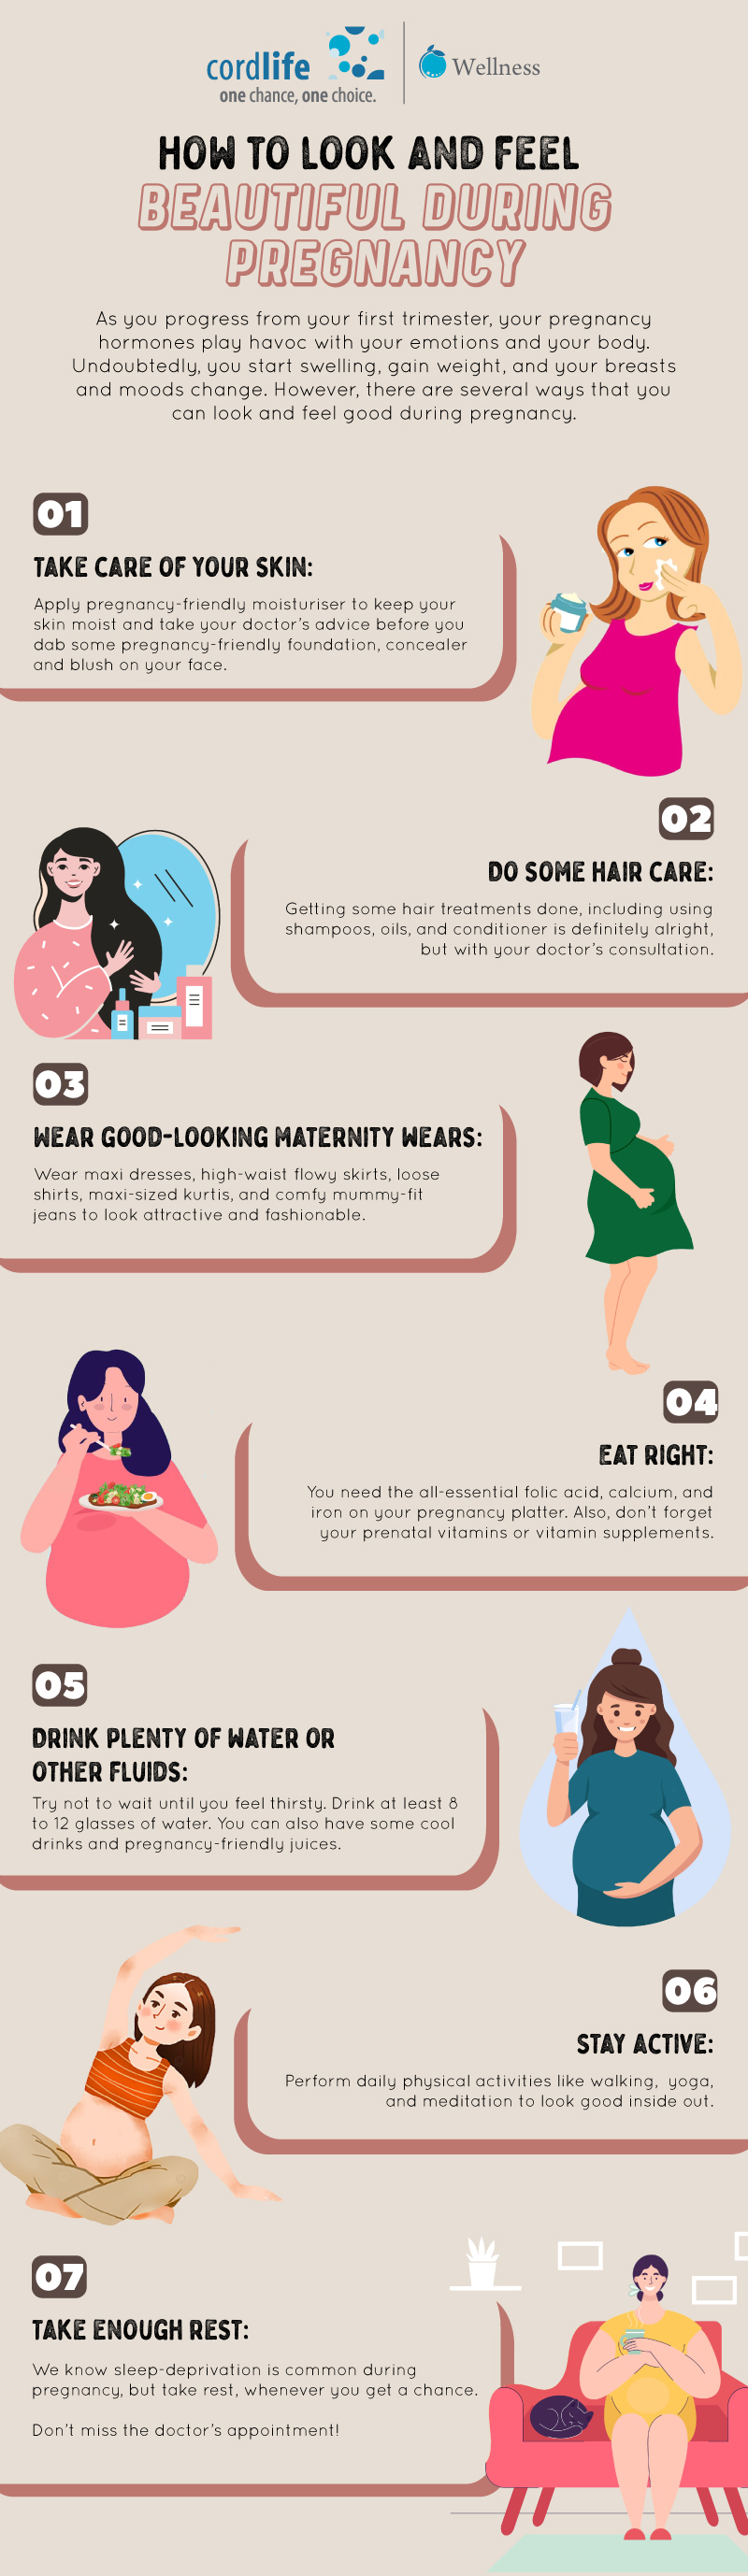 How to look and feel beautiful during pregnancy?